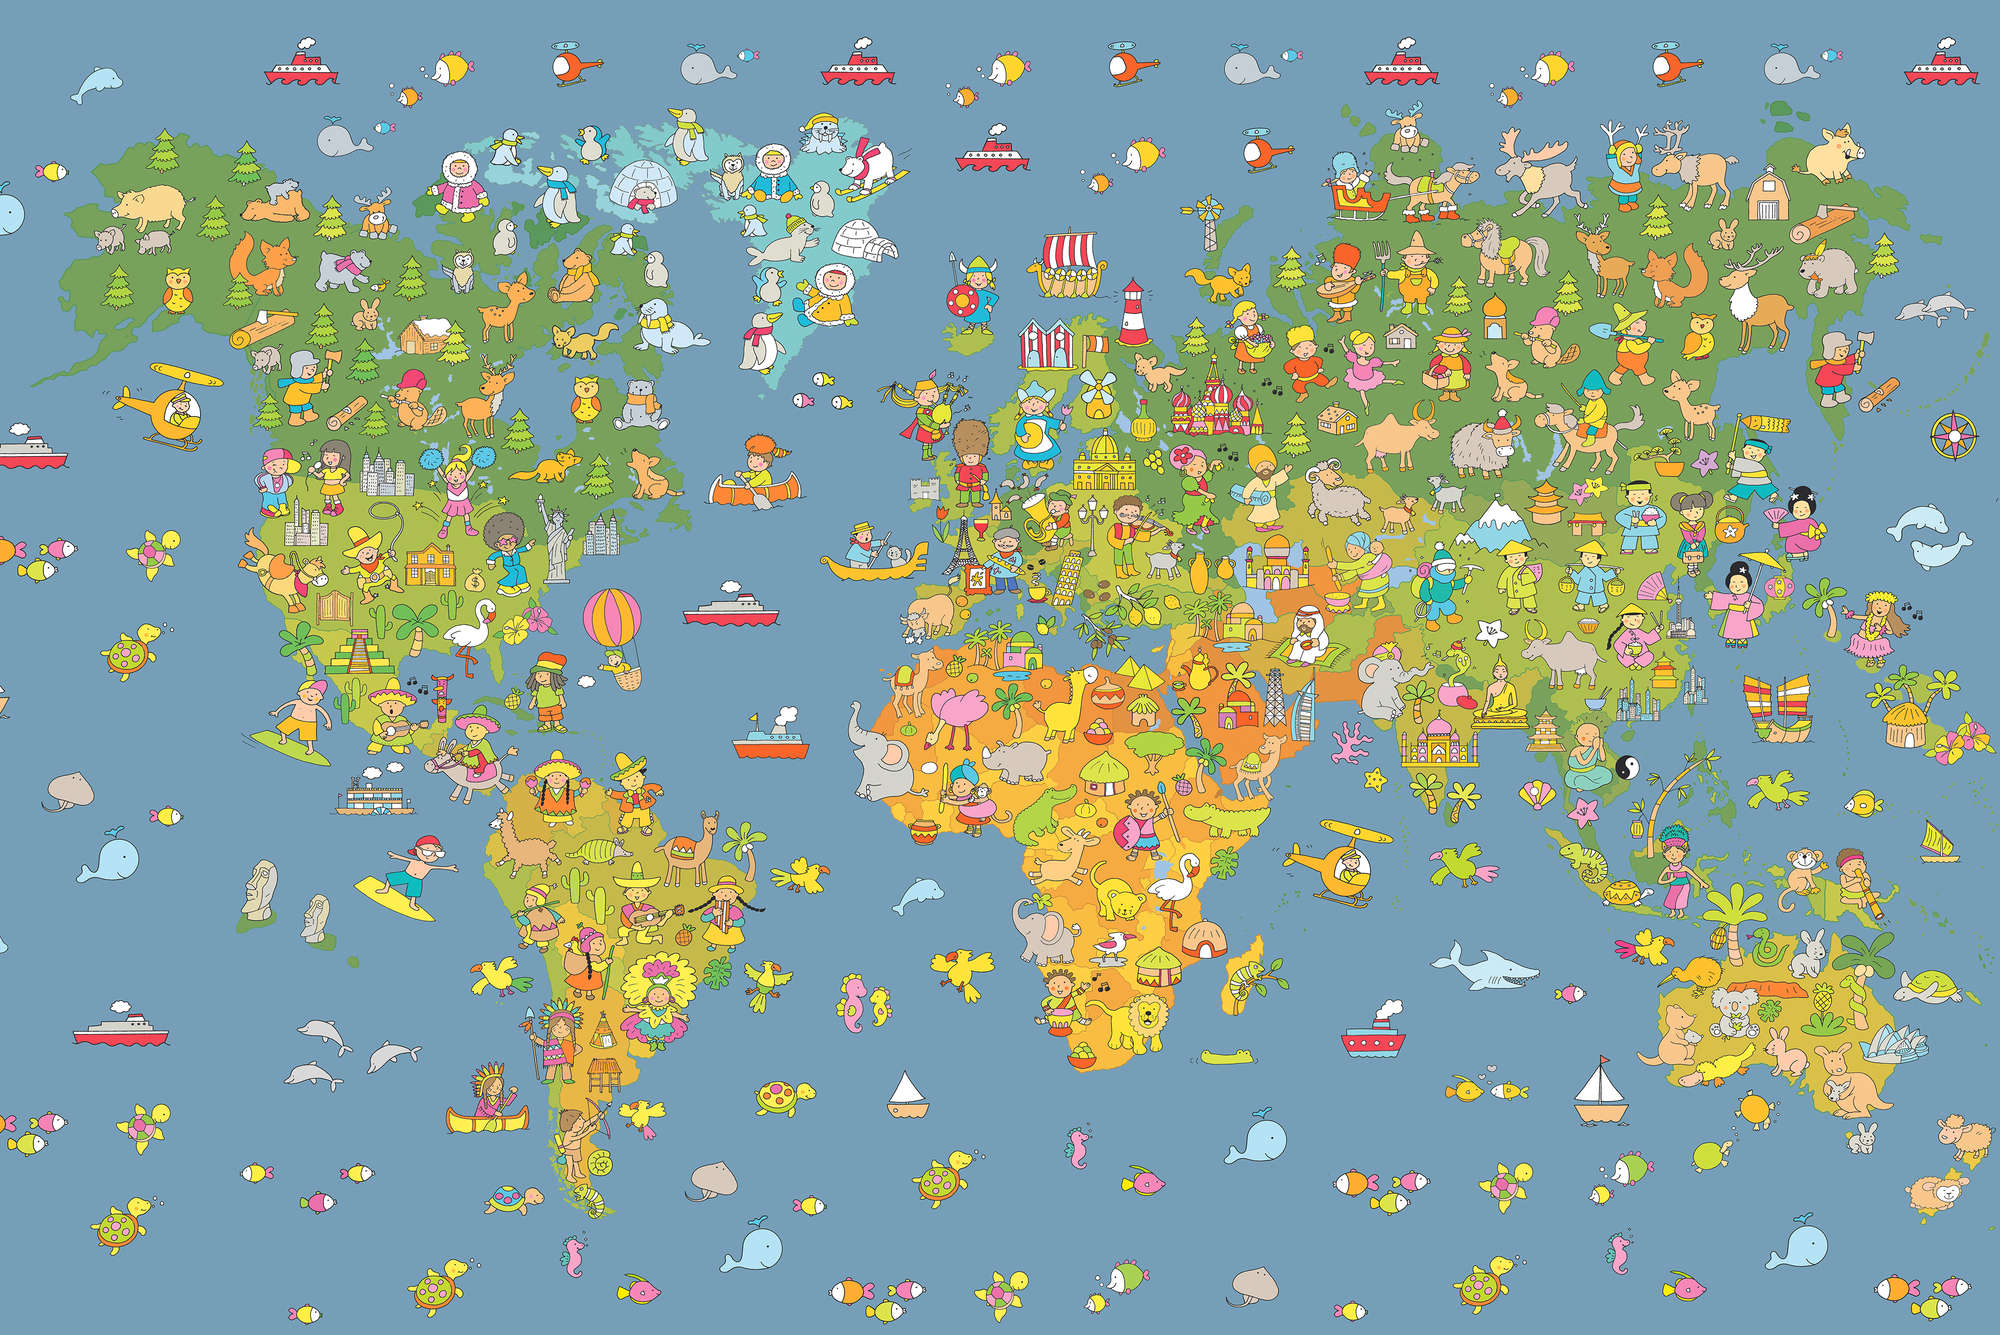             Kids mural world map with country symbols on mother of pearl smooth fleece
        